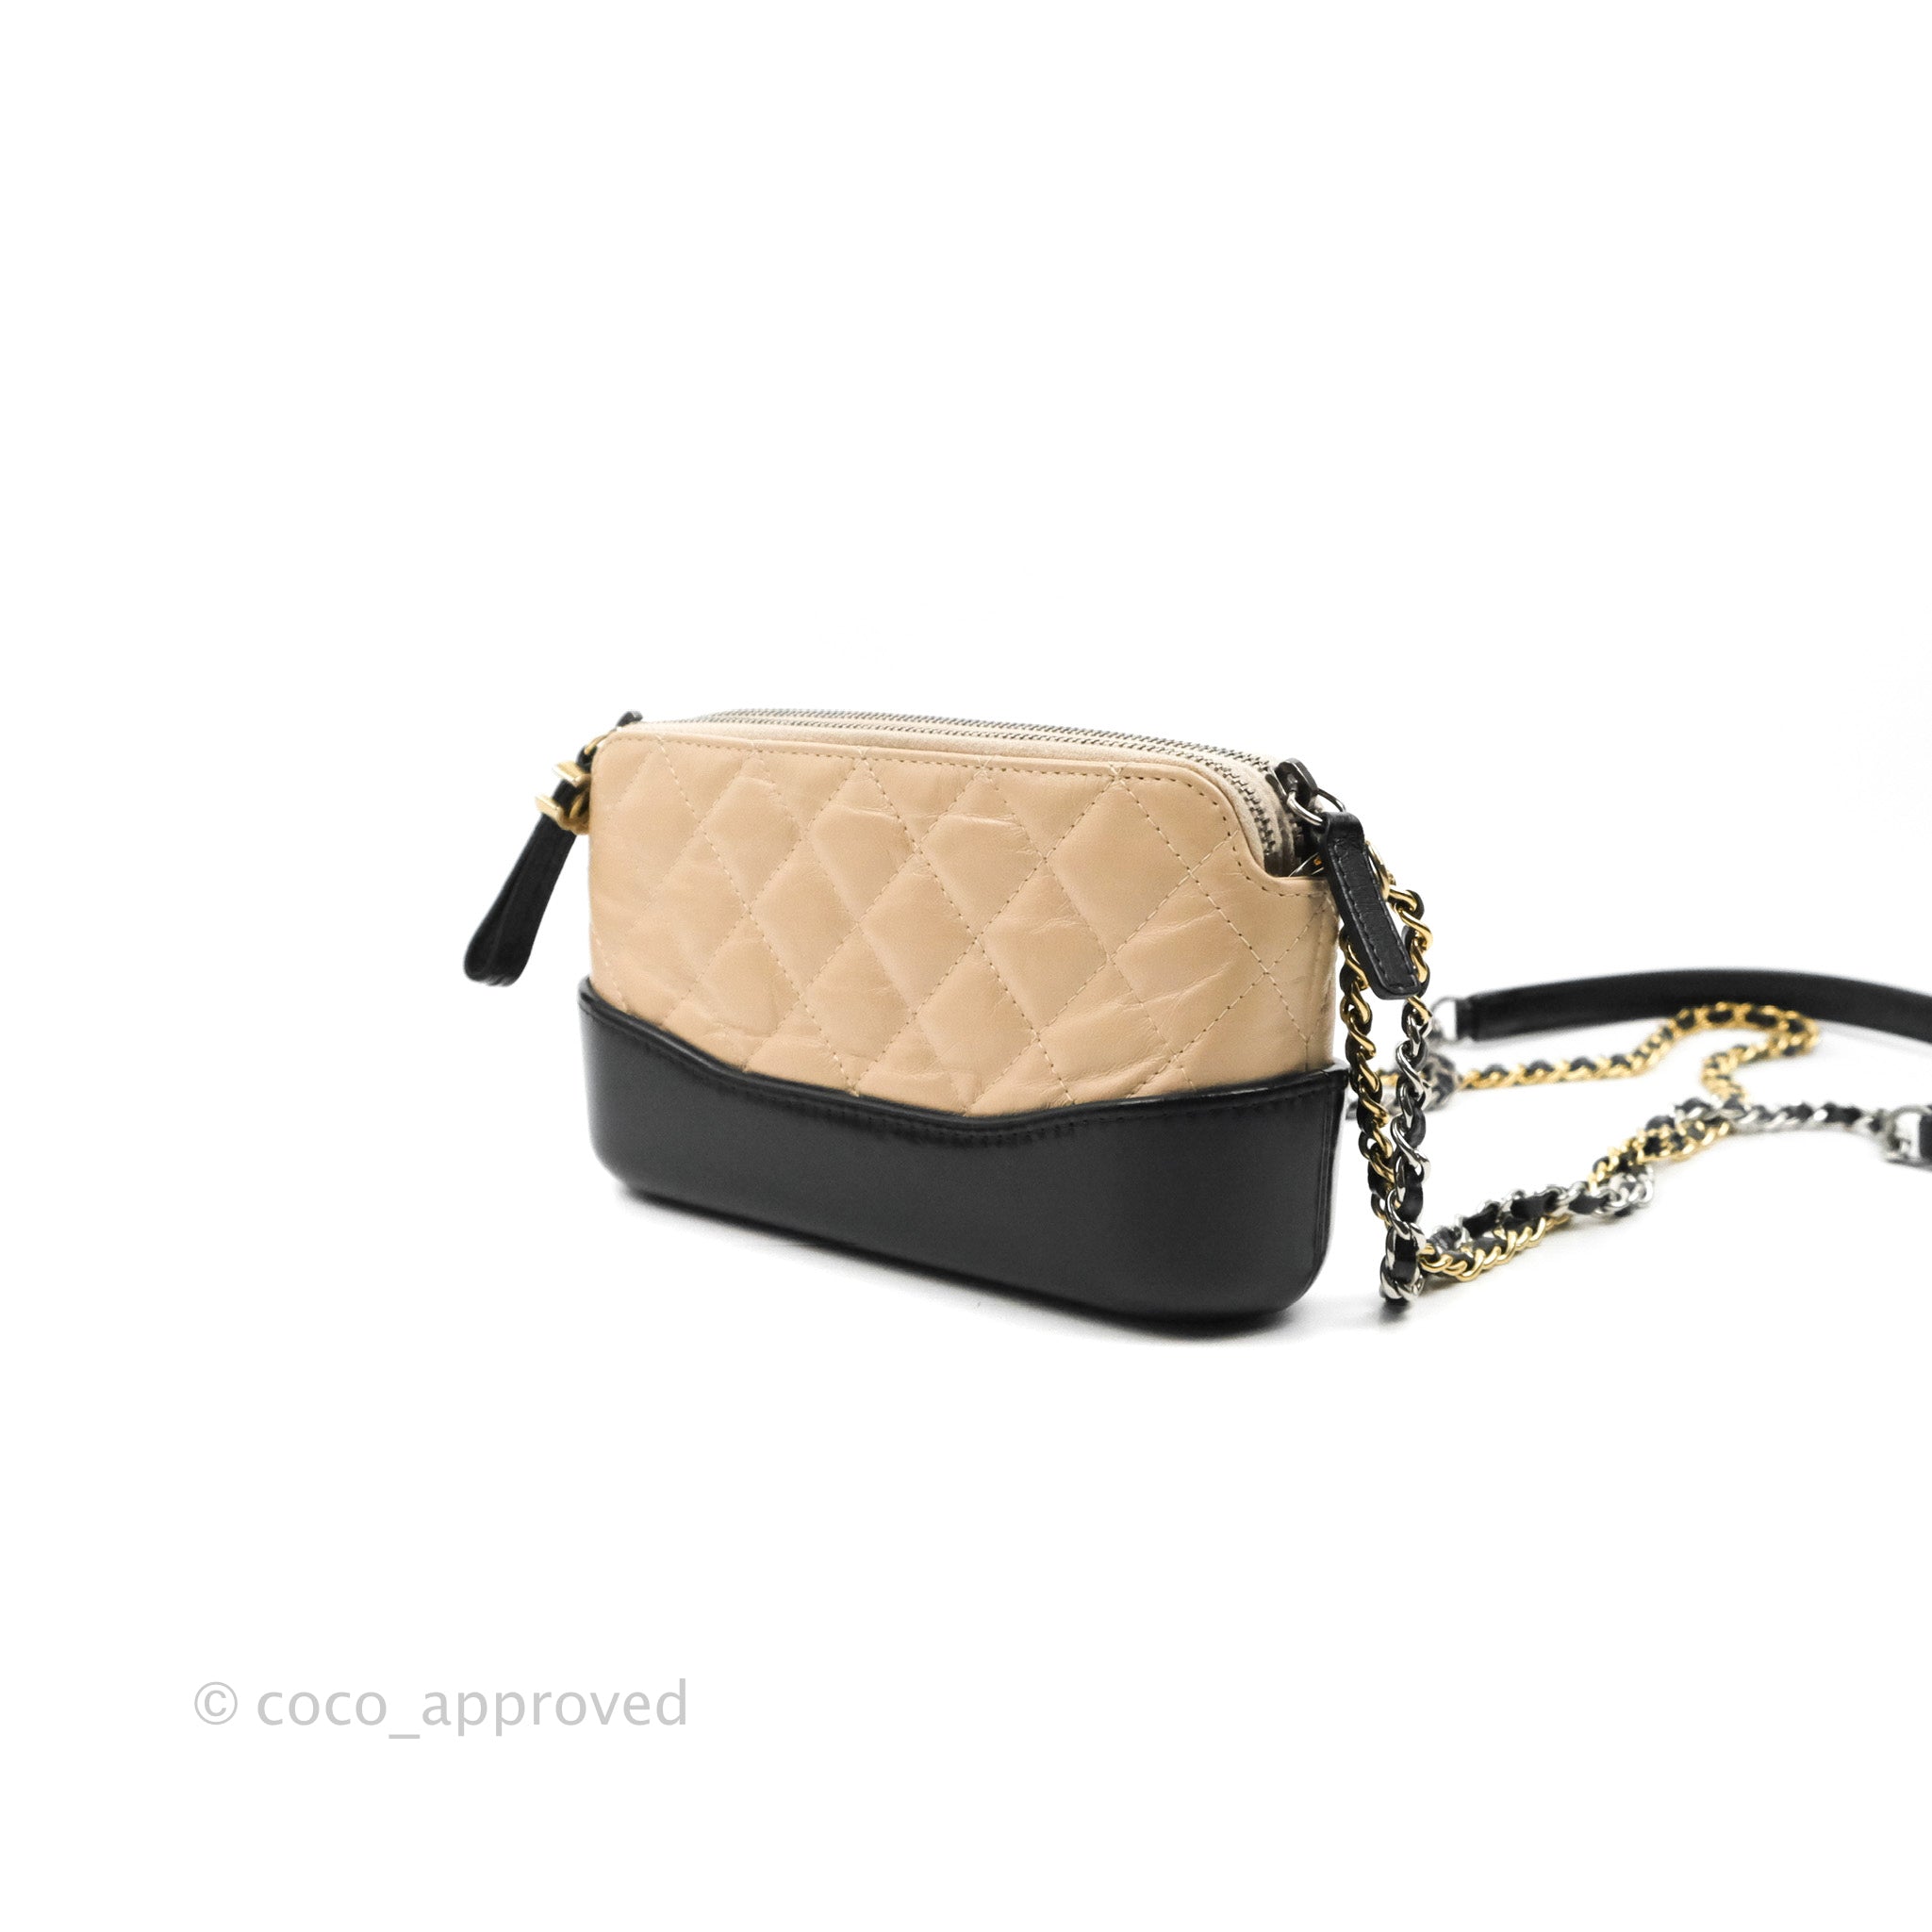 Chanel Beige/Black Quilted Calfskin Leather Gabrielle Clutch with Chain Bag